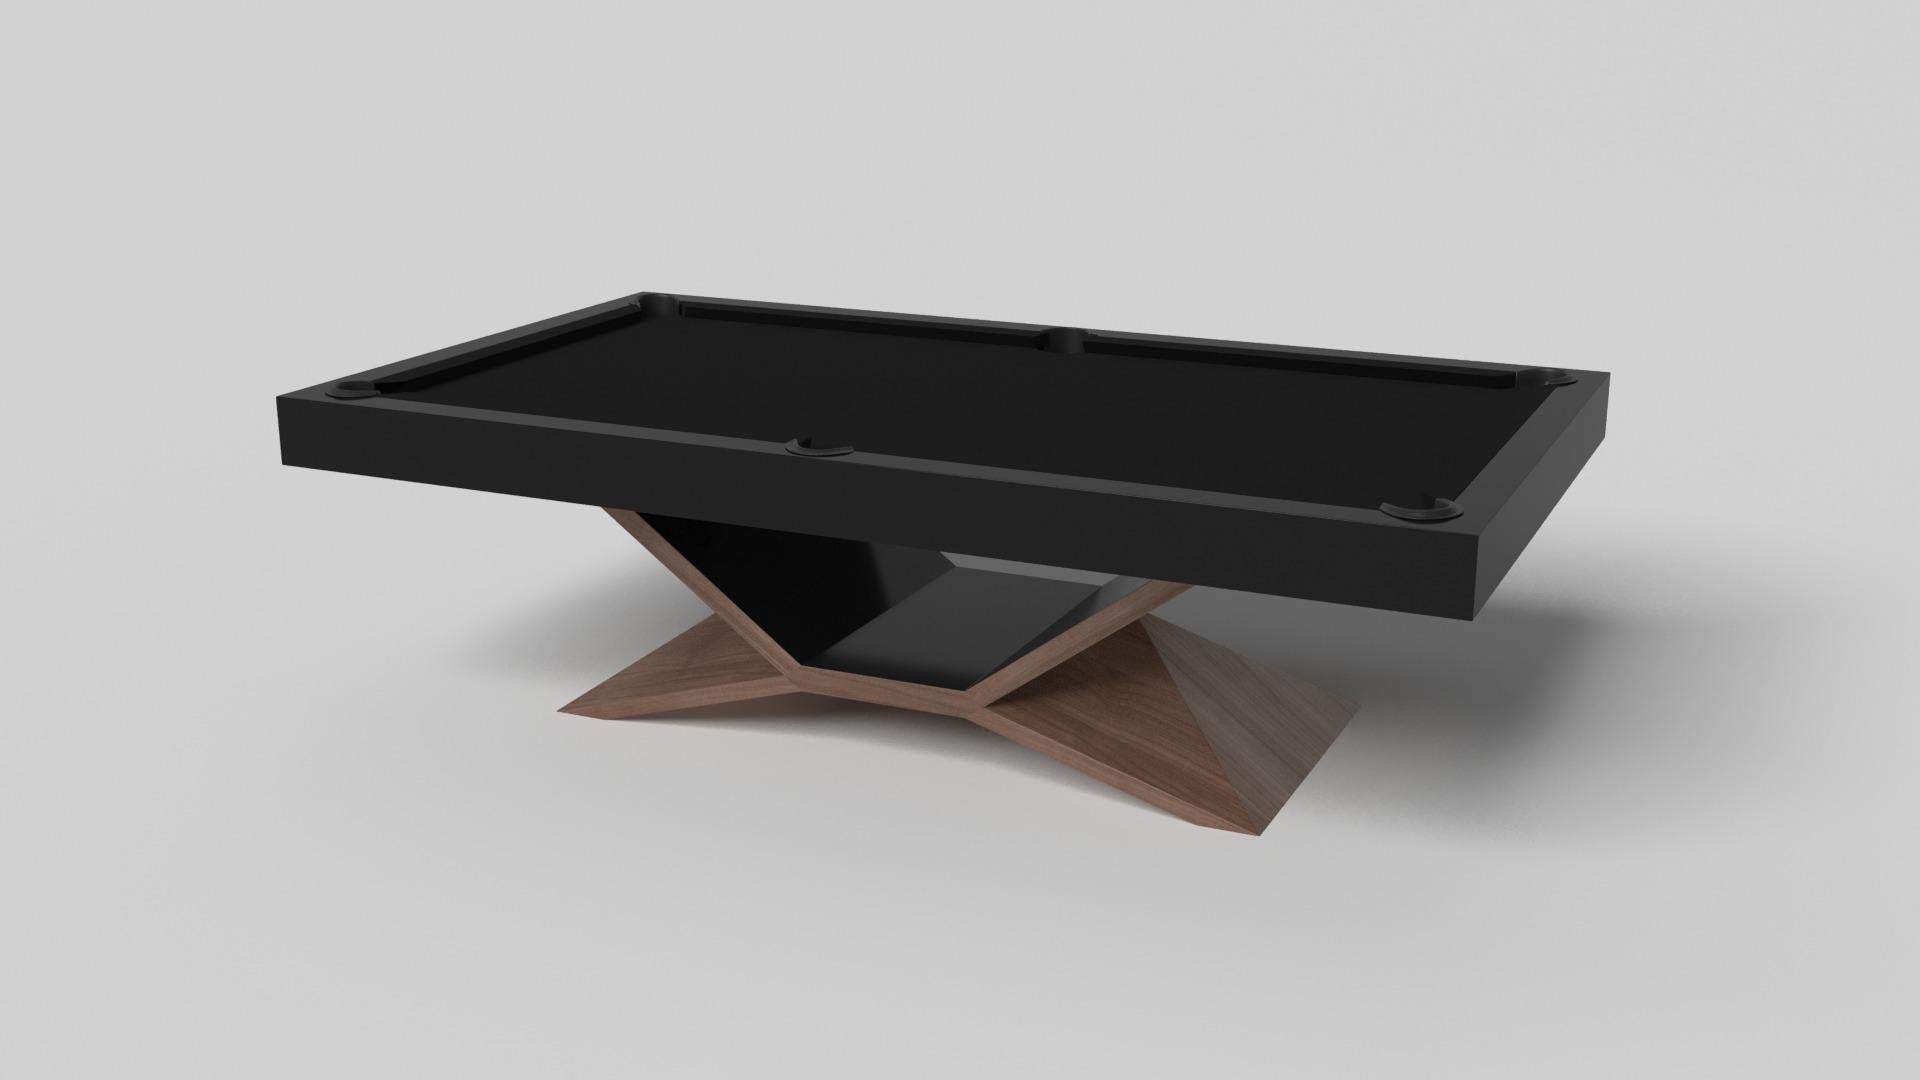 In chrome, the Kors pool table is a superior example of contrasting geometric forms. This table features an angular base that highlights the beauty of negative space from the front view. From the side view, it offers a completely different